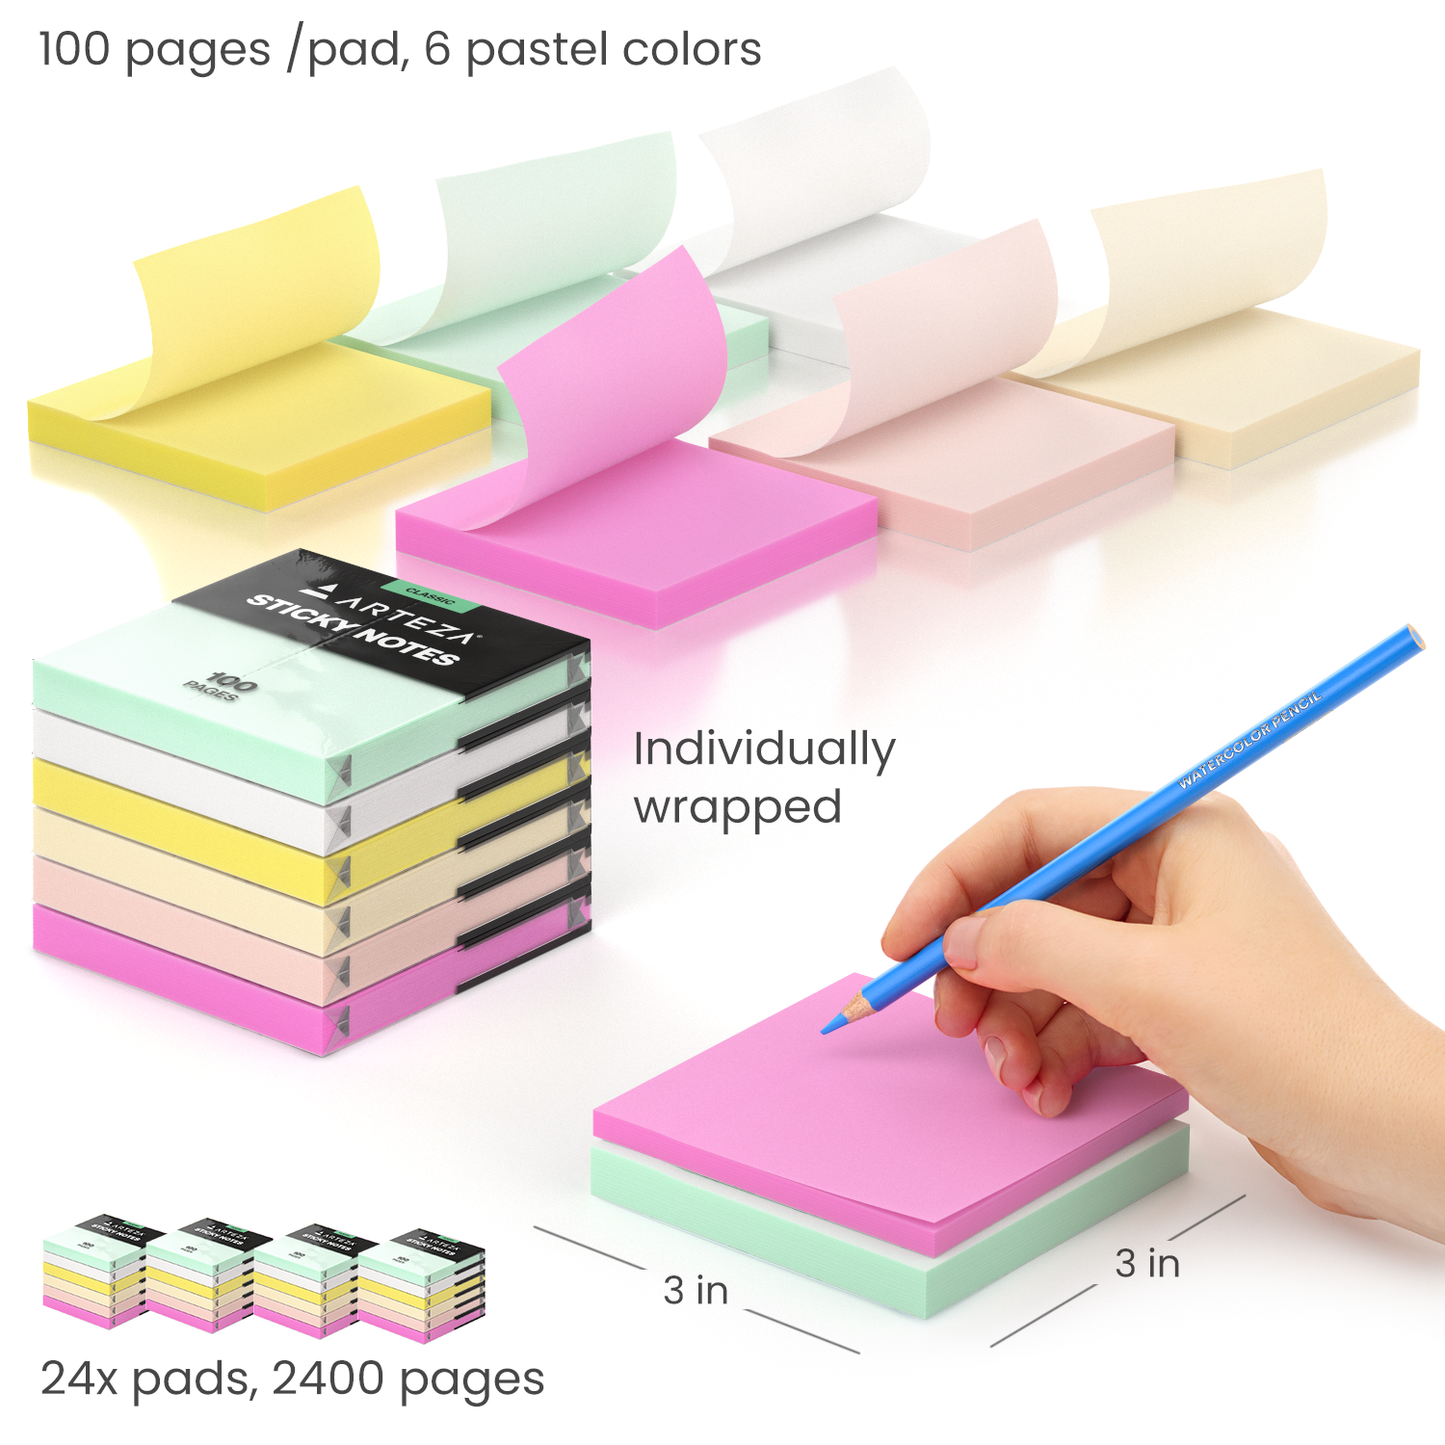 Sticky Notes 100 Sheets Pack of 24